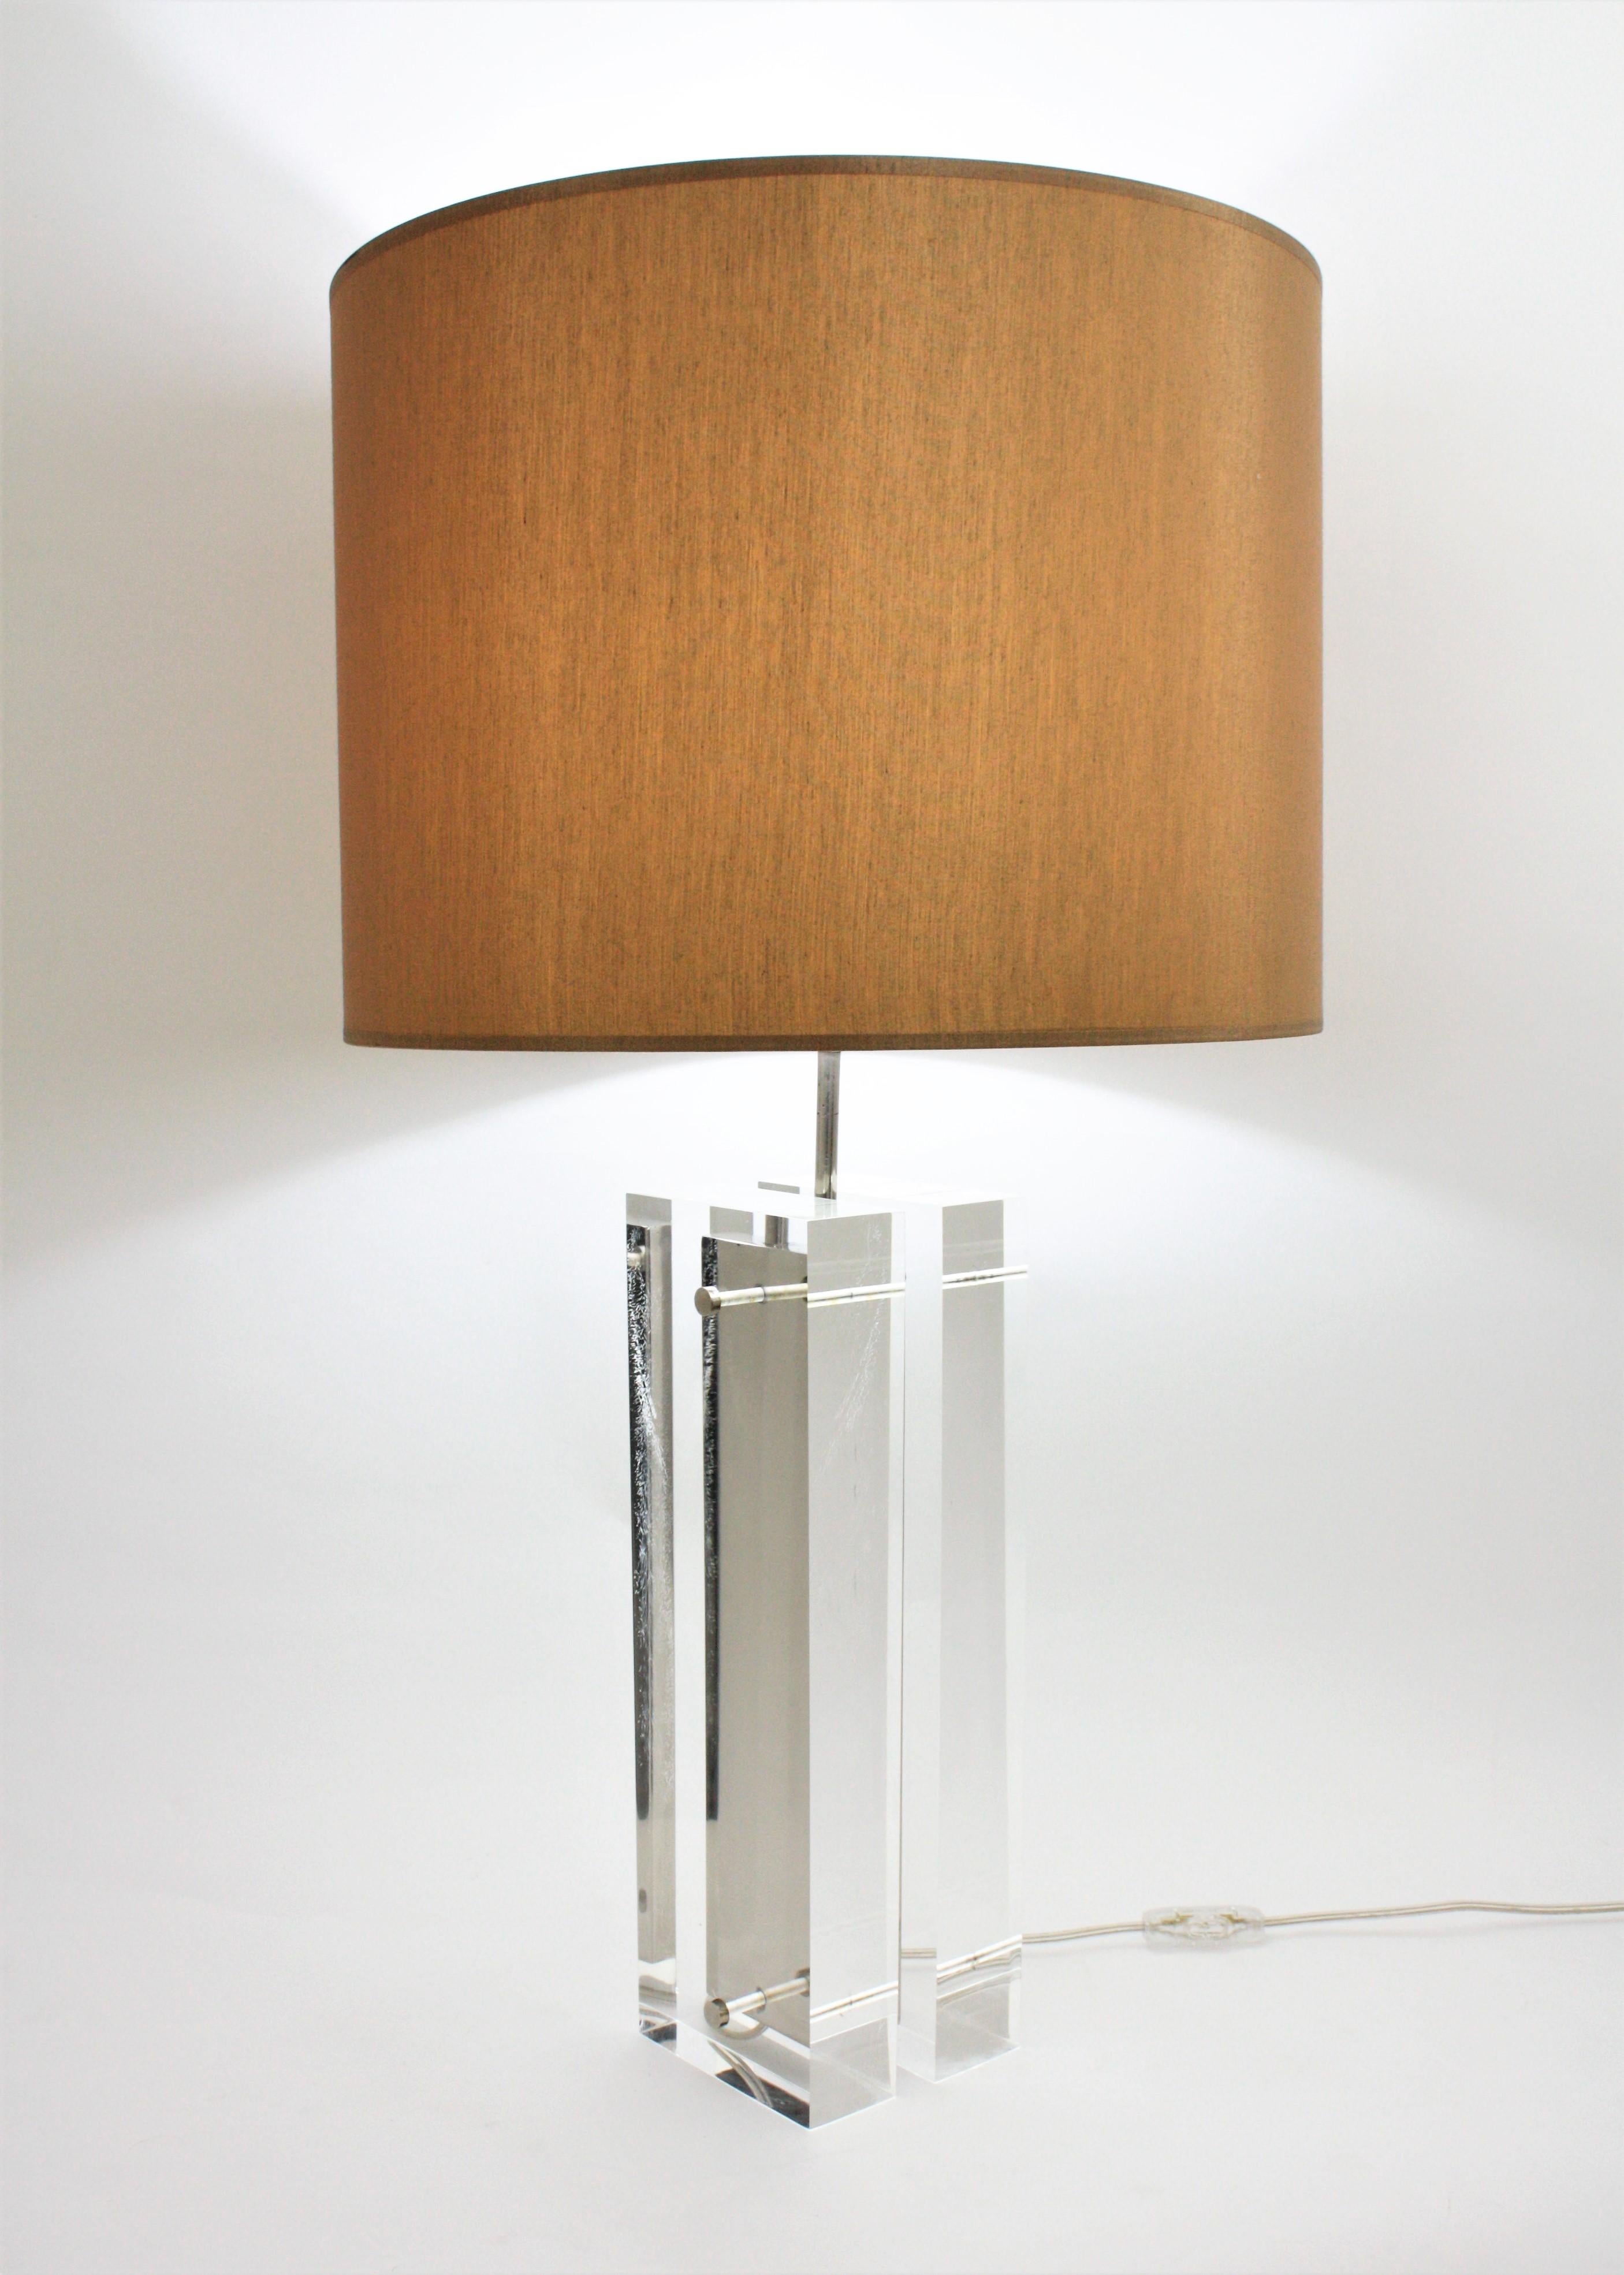 20th Century Charles Hollis Jones Lucite and Chromed Steel Midcentury Table Lamp For Sale